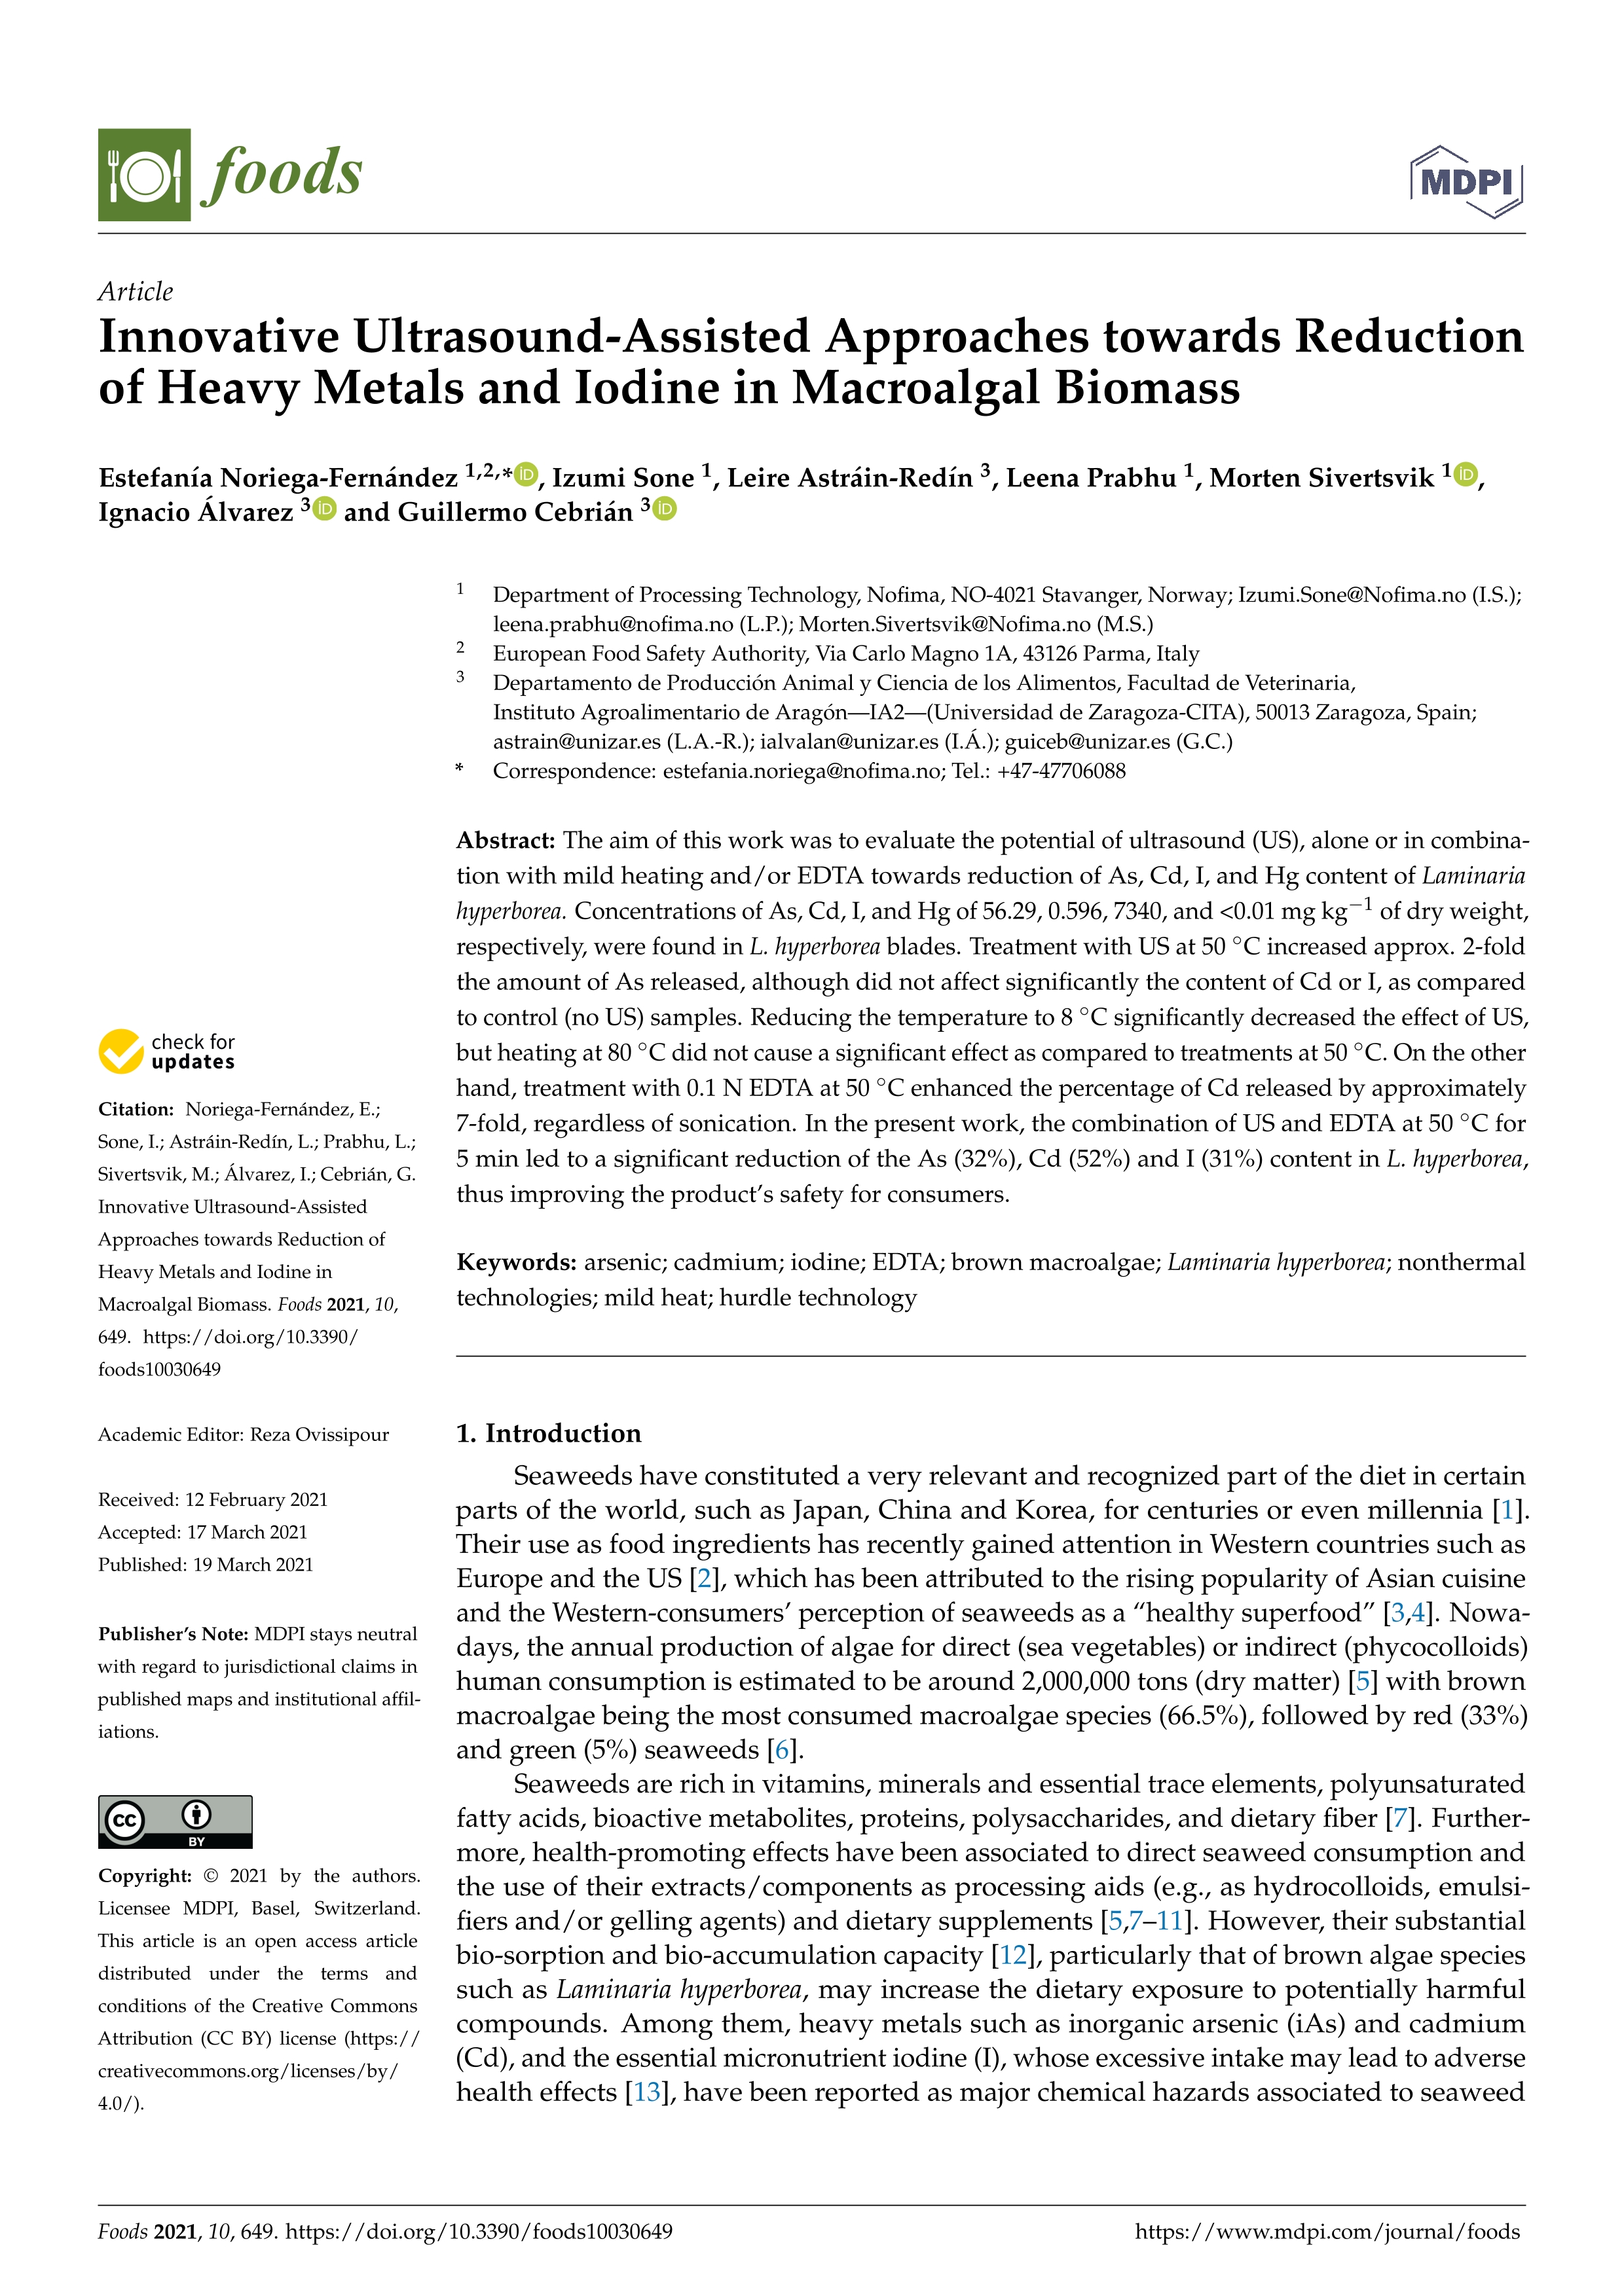 Innovative ultrasound-assisted approaches towards reduction of heavy metals and Iodine in macroalgal biomass